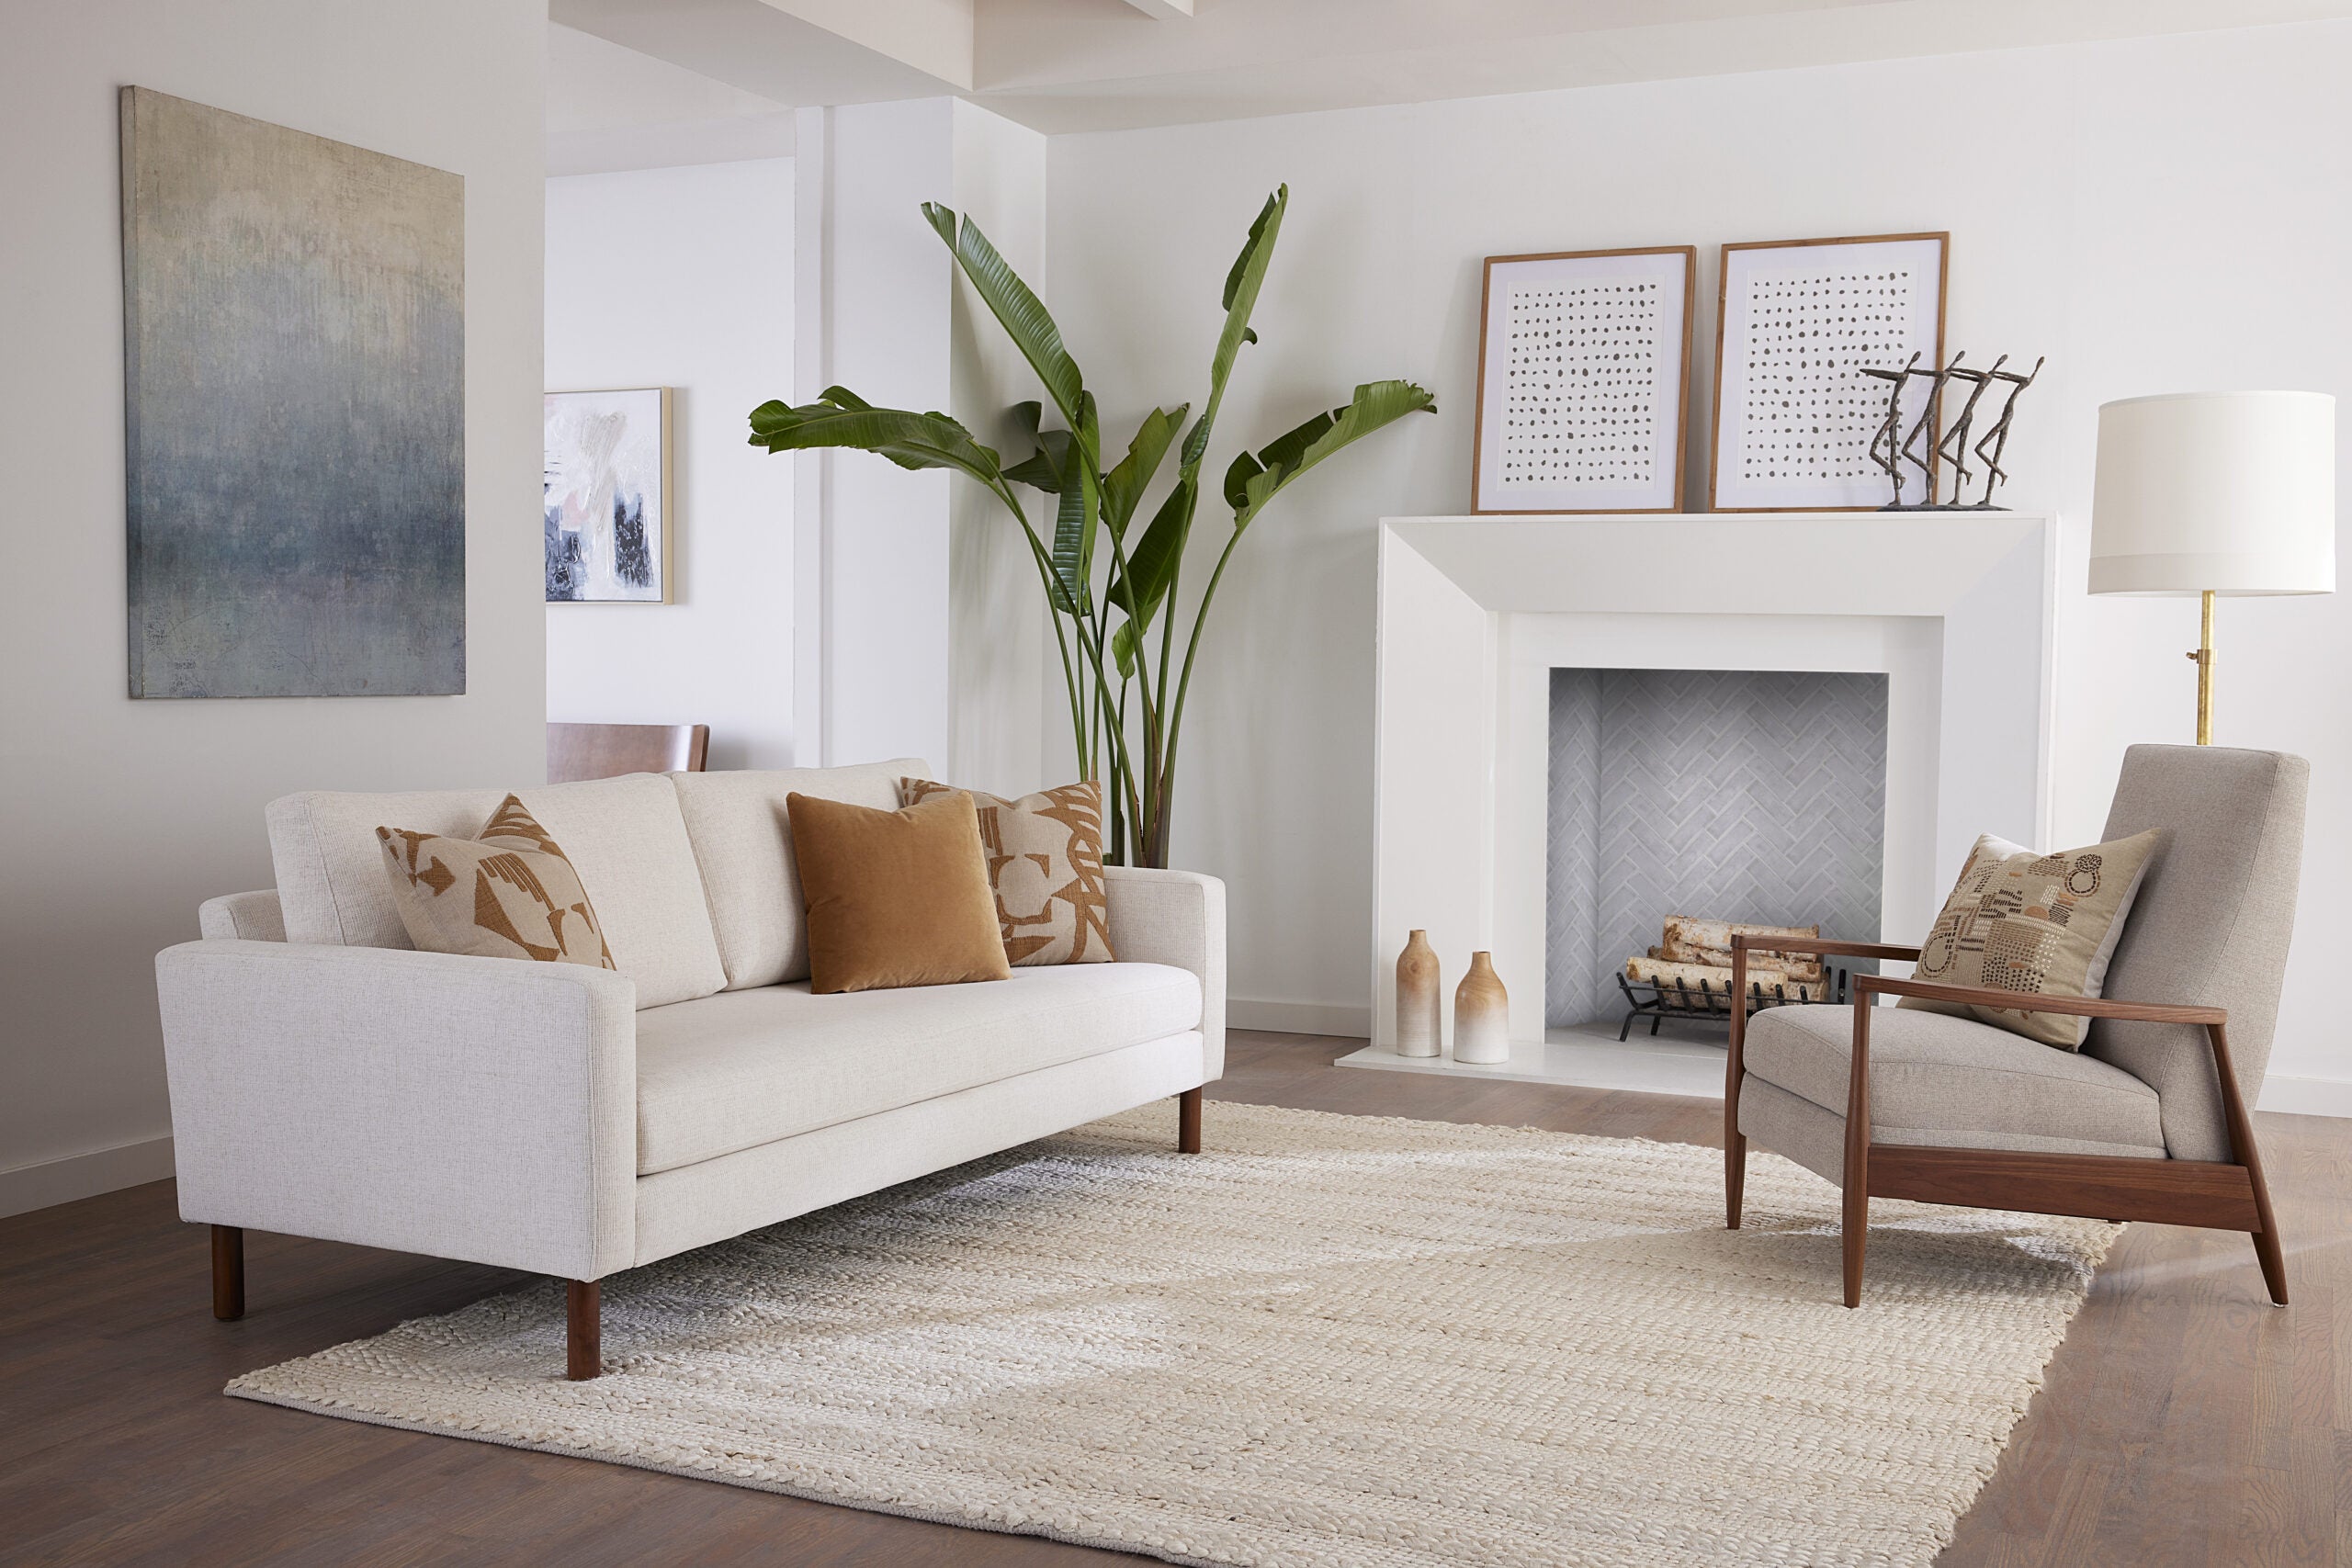 A modern living room features a beige sofa with decorative cushions, an armchair, a large indoor plant, and minimalist art on the walls. The room has a light, neutral color palette with wooden accents and a textured area rug on the floor.